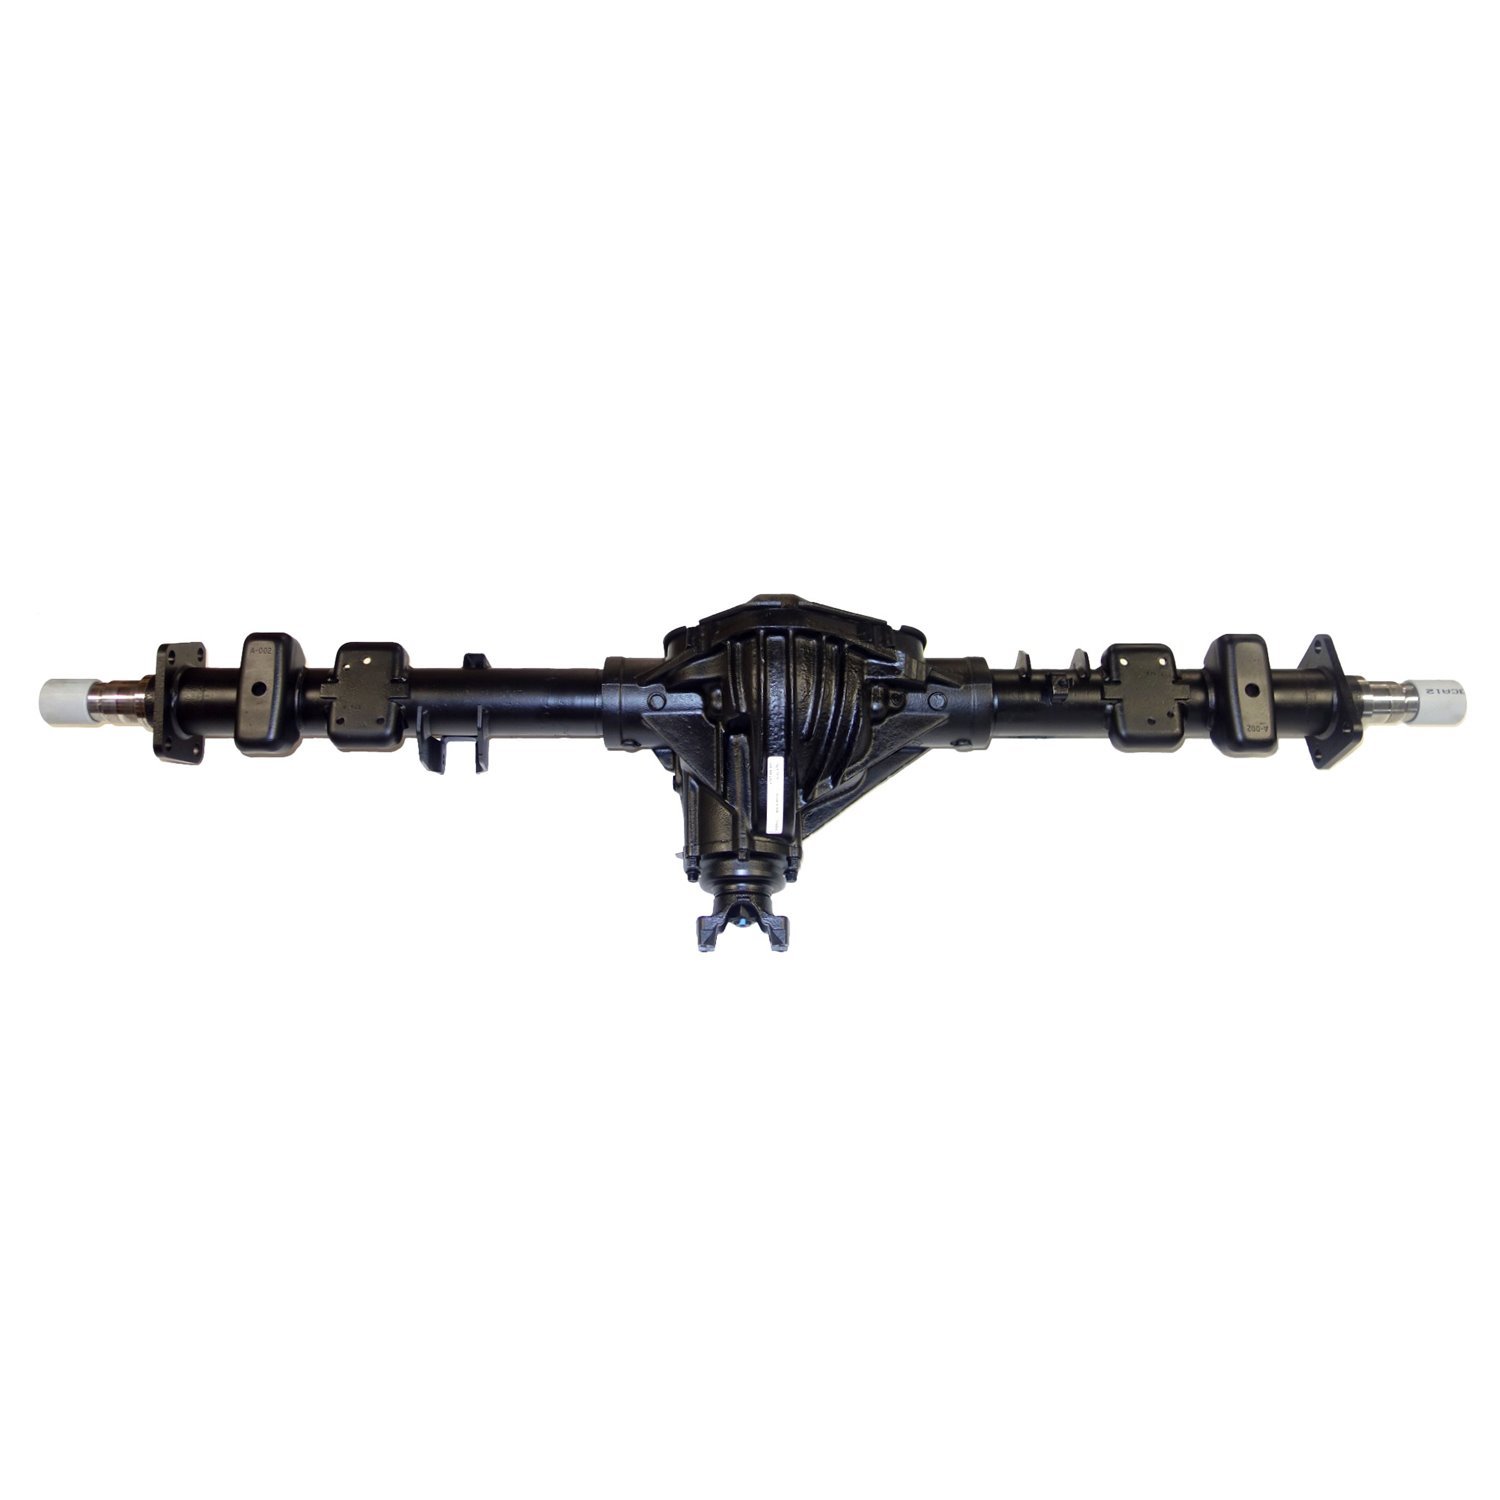 Remanufactured Axle Assy for GM 14 Bolt Truck 90-00 GM 2500 & 3500 Pickup 4.56 , 2wd, SRW